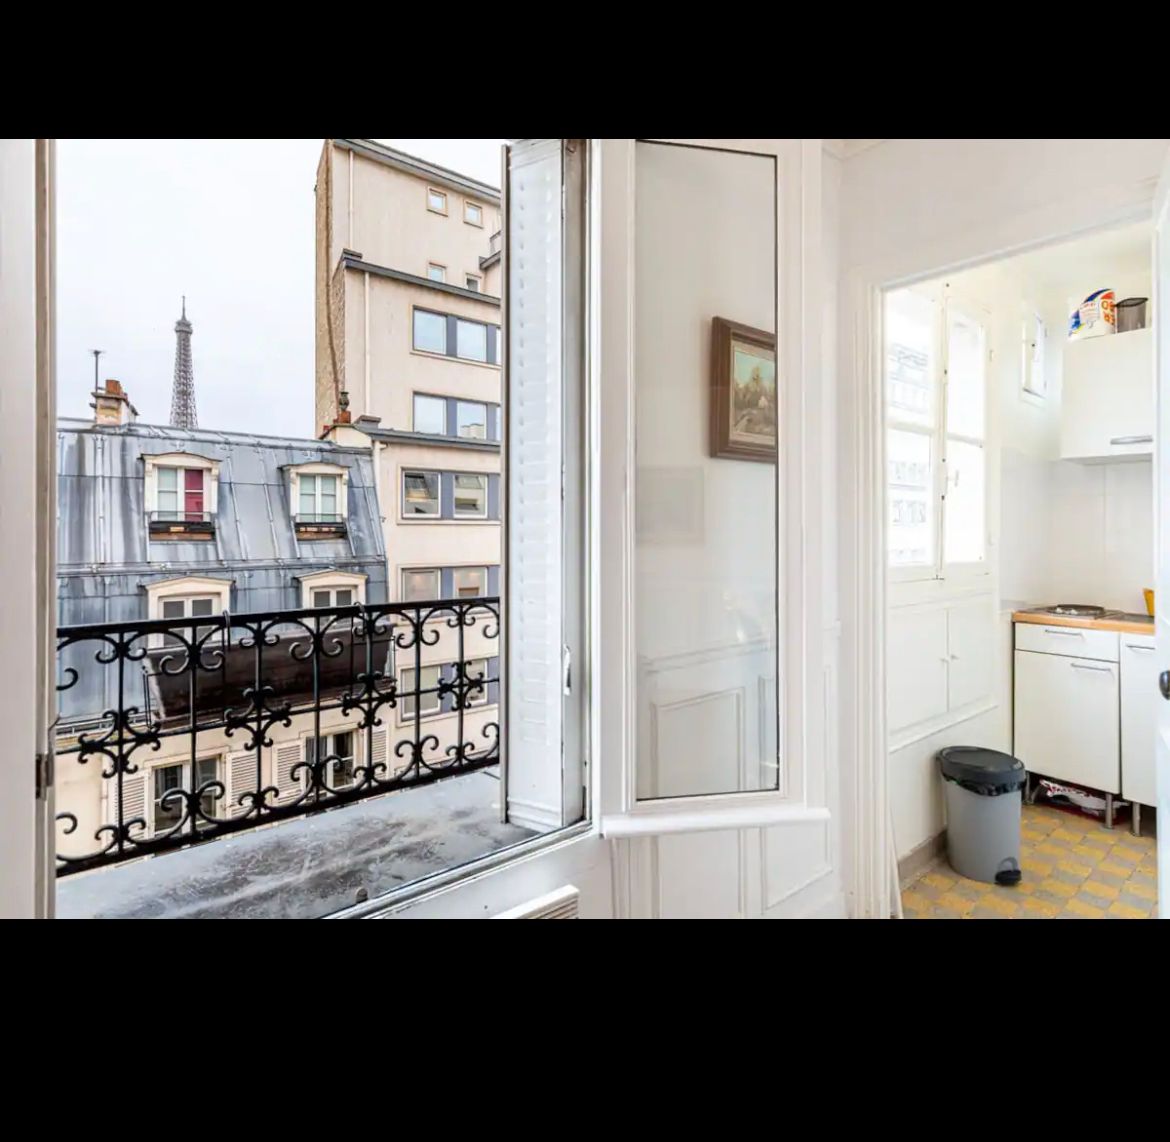 Beautiful apartment with view of the Eiffel Tower